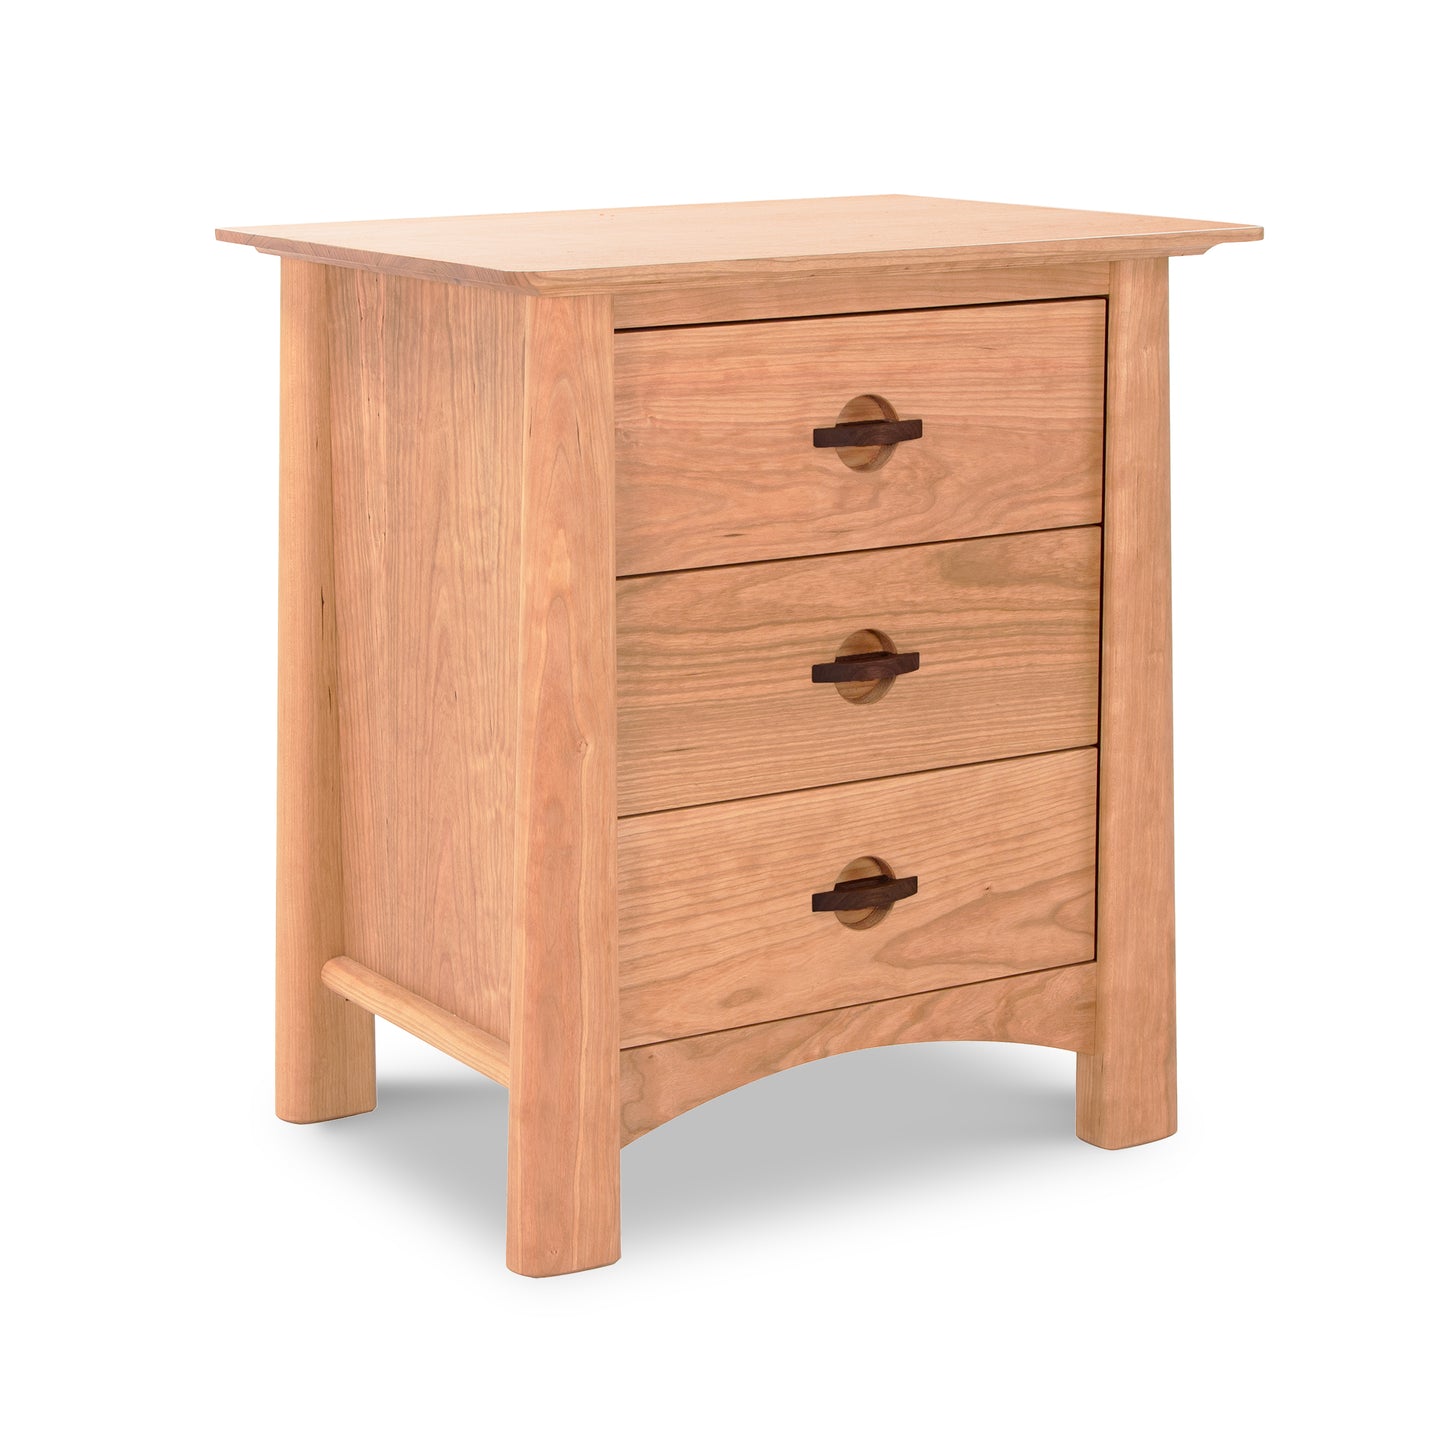 A Cherry Moon 3-Drawer Nightstand made by Maple Corner Woodworks, featuring rounded handles and sturdy legs, isolated on a white background.